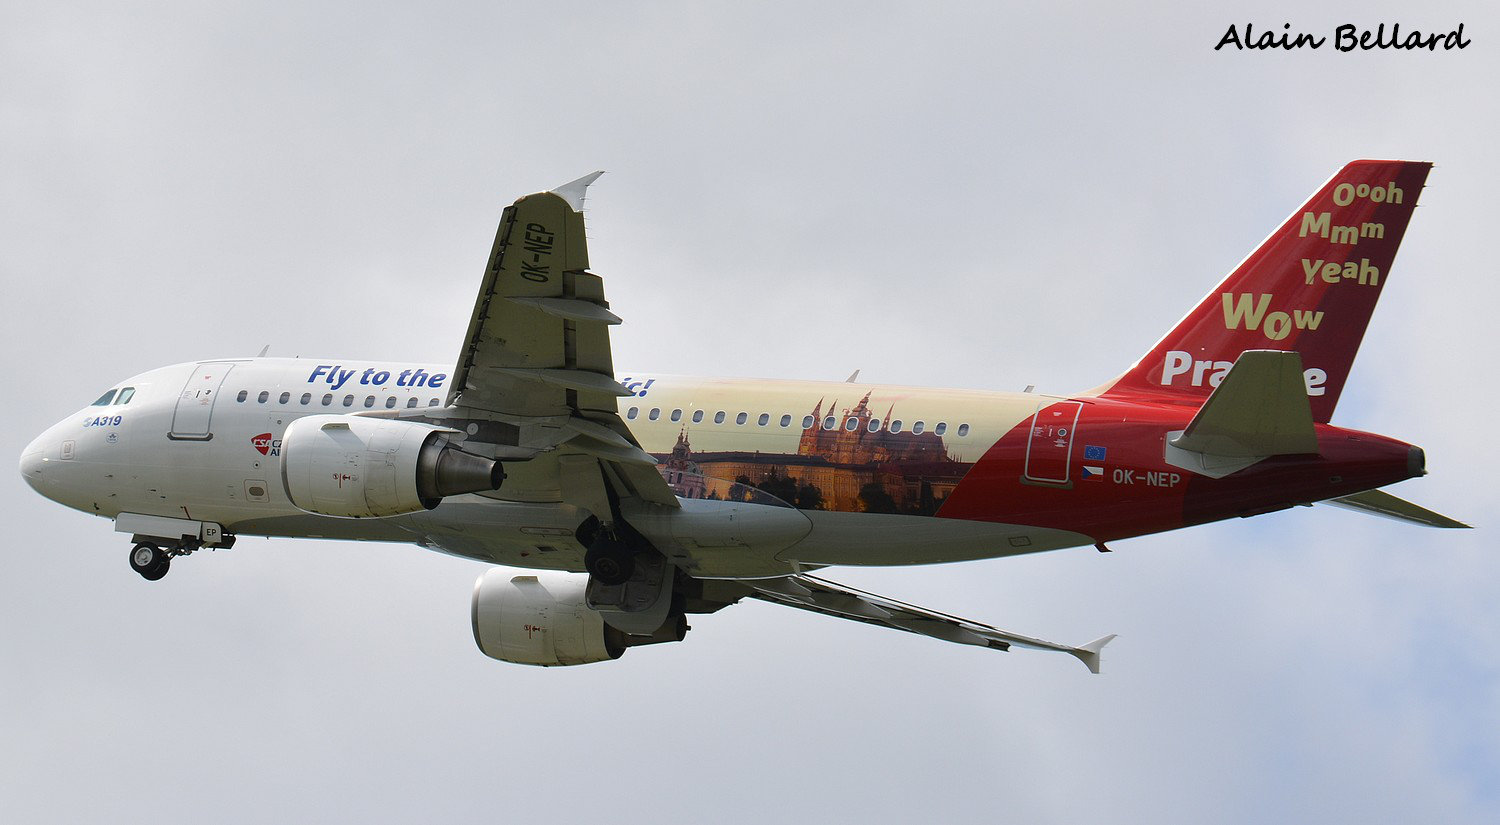  [9/05/2015] Airbus A319 ( OK-NEP ) Czech Airlines ( City Of Magic ) Wyev